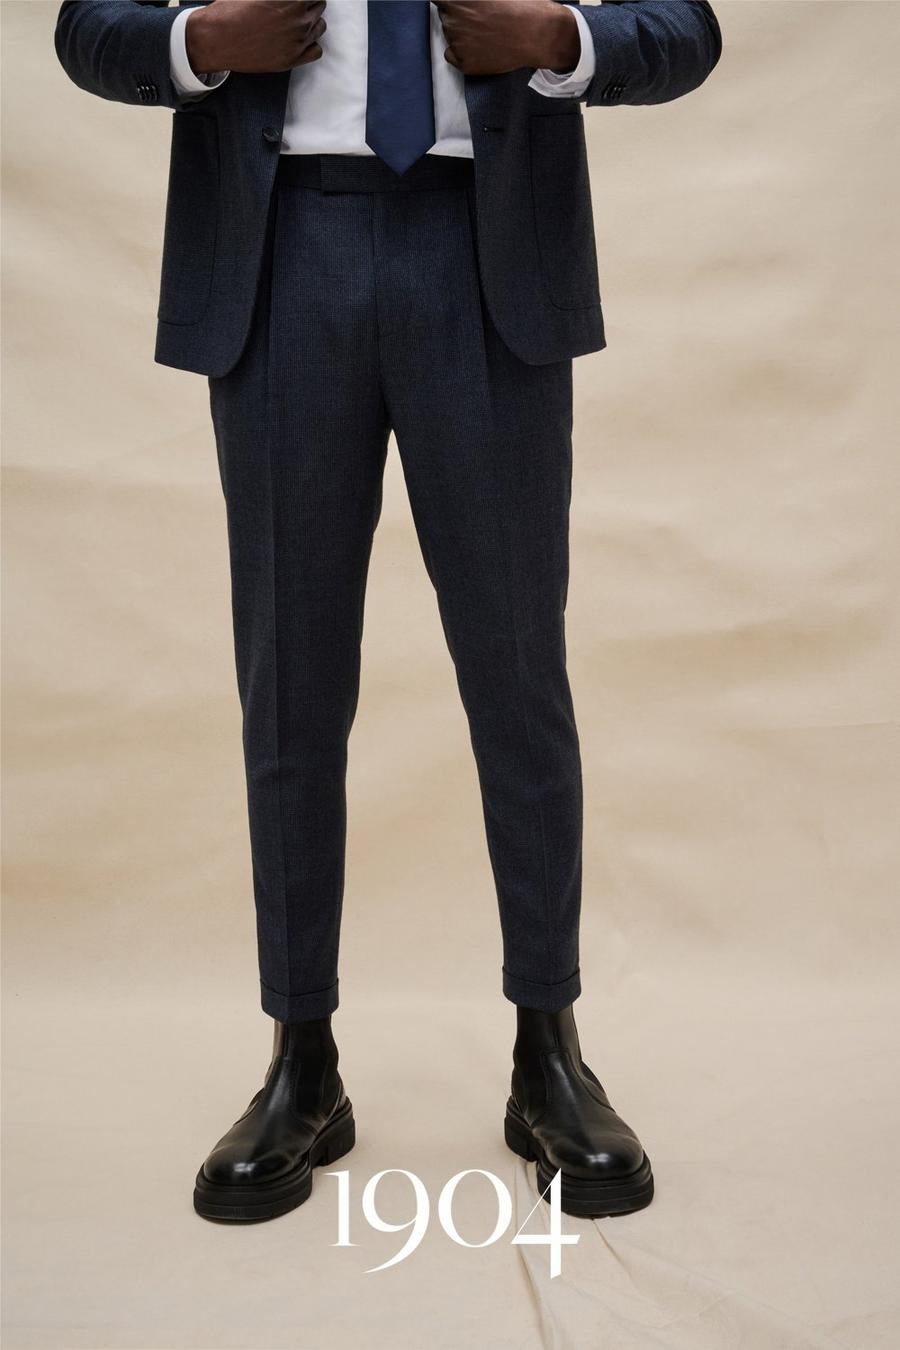 1904 Blue Puppytooth Wool Turn Up Trouser